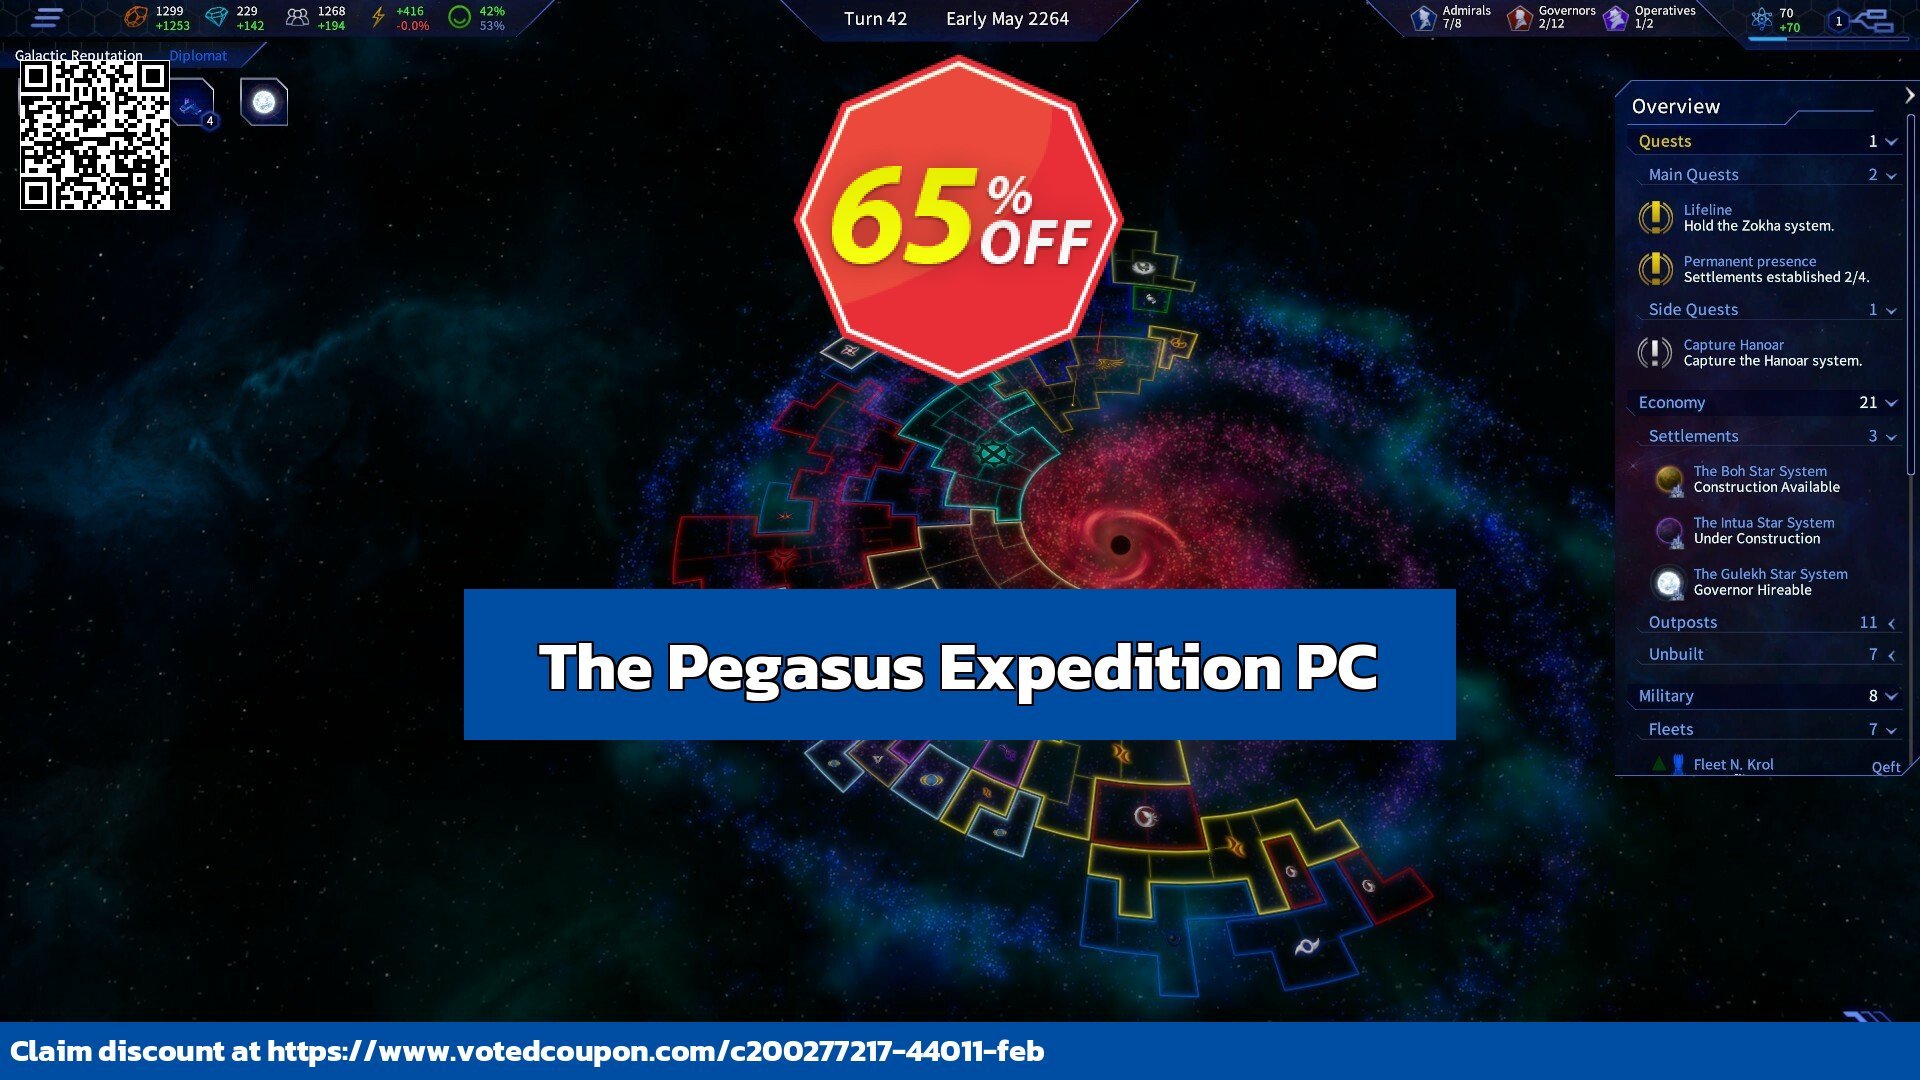 The Pegasus Expedition PC Coupon Code May 2024, 68% OFF - VotedCoupon